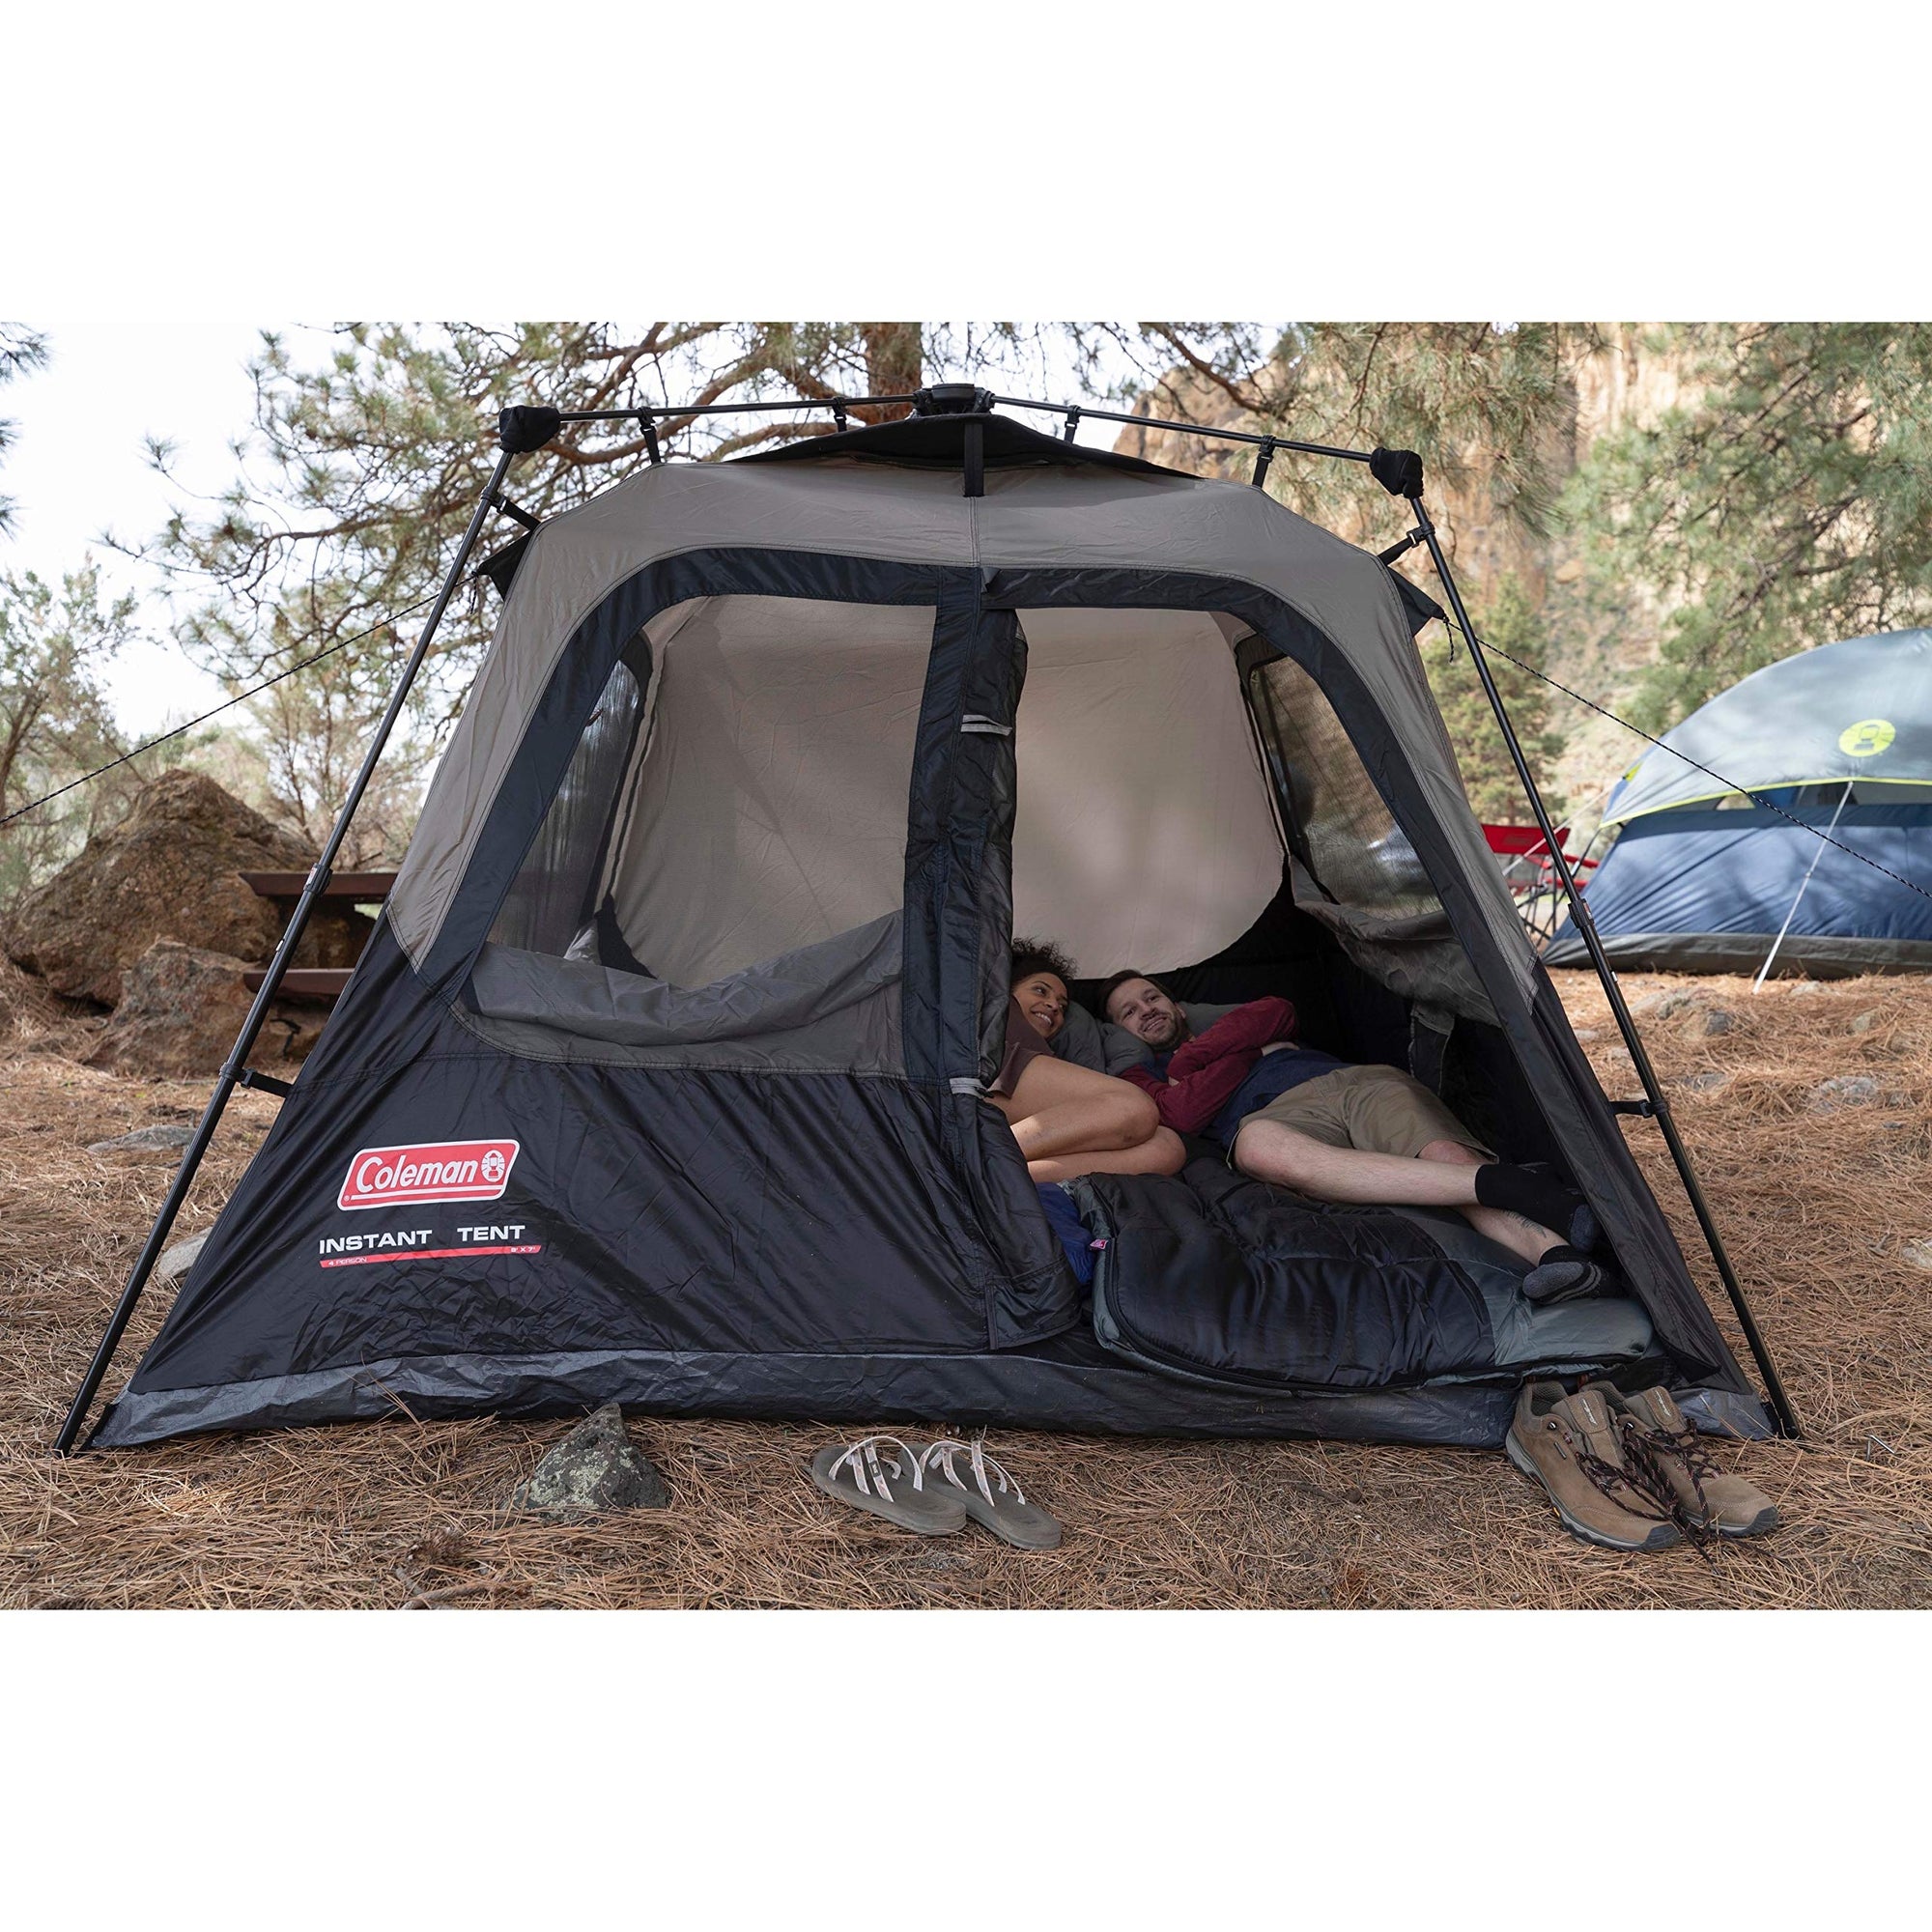 Coleman Cabin Tent with Instant Setup in 60 Seconds - Camping